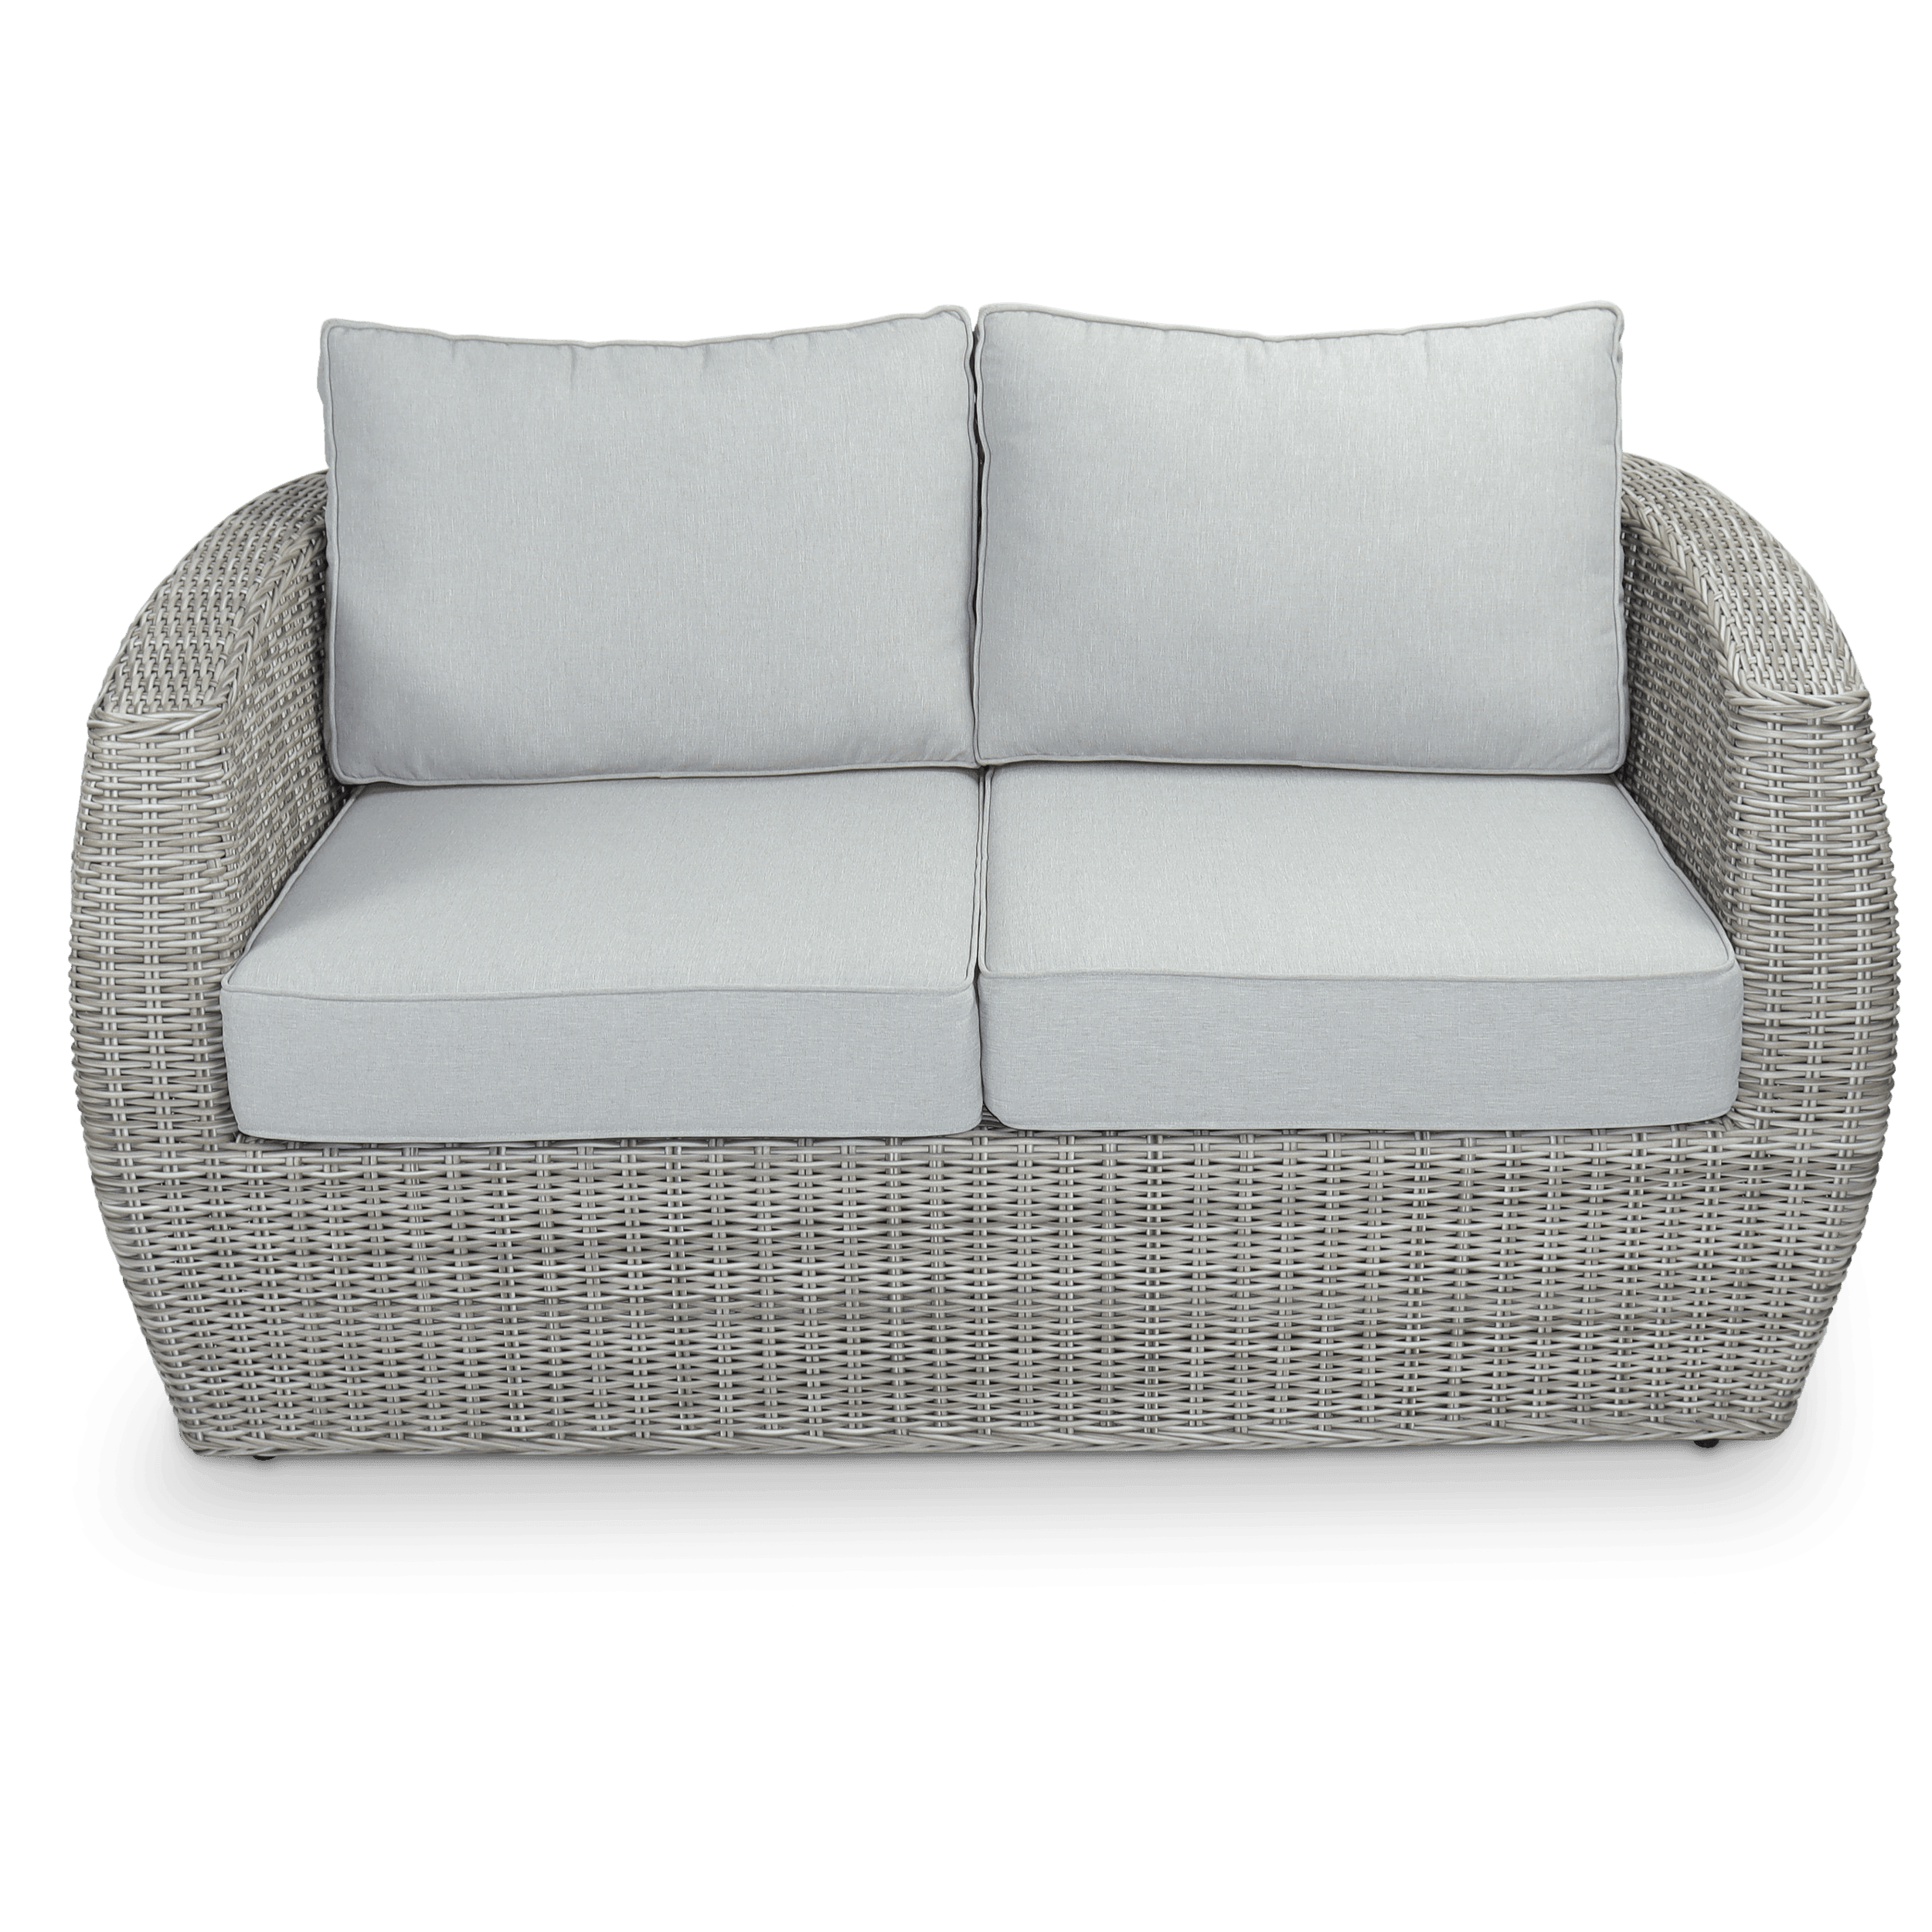 Sienna 2 Seater in Kubu Grey Synthetic Viro Rattan and Mountain Ash Sunproof All Weather Fabric - The Furniture Shack